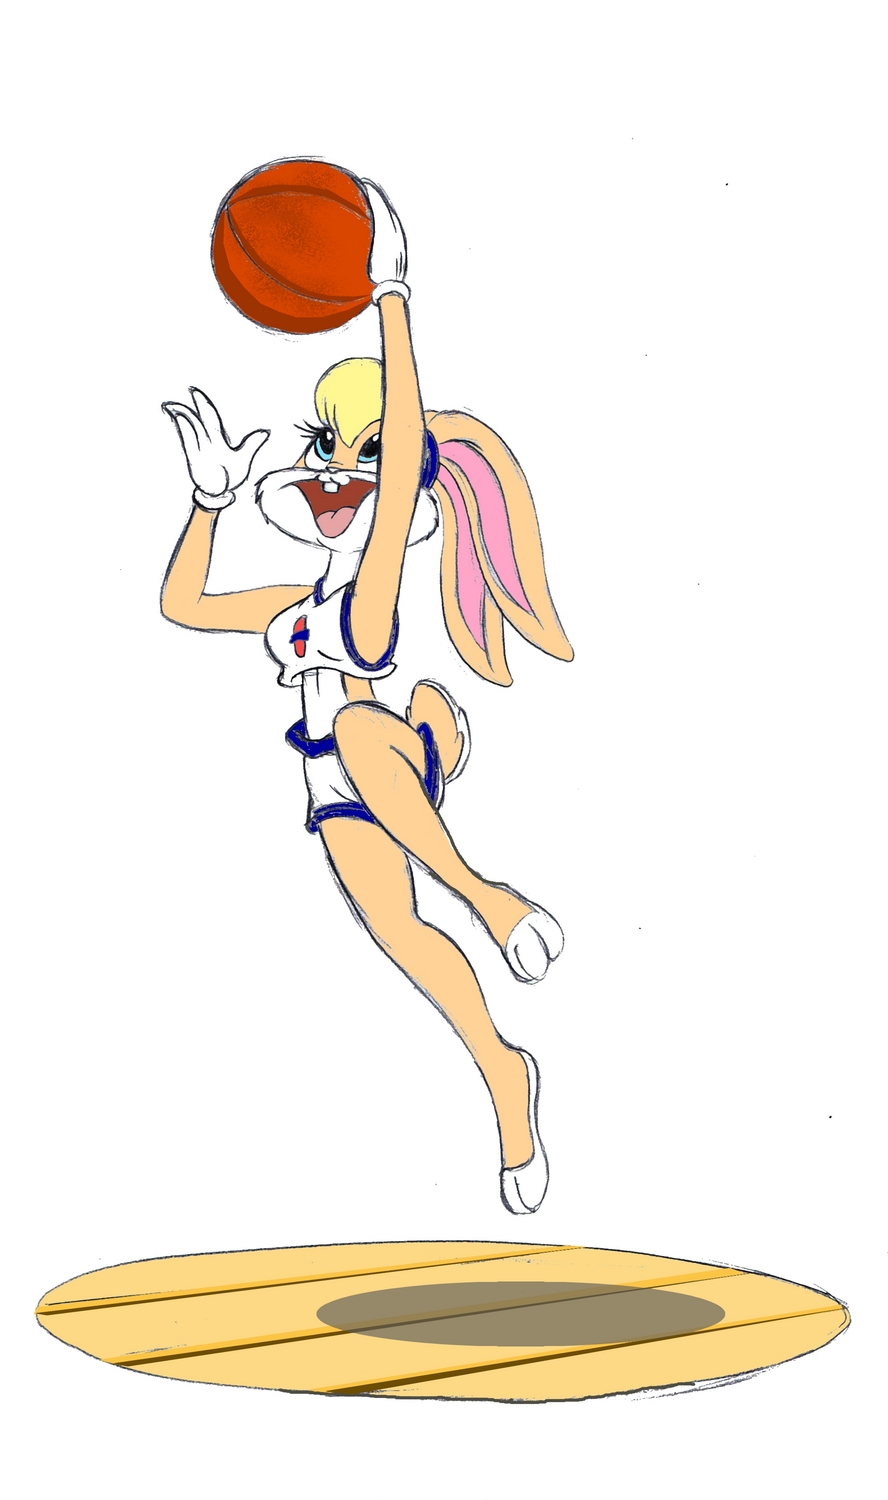 Free Basketball Bunny Cliparts, Download Free Basketball Bunny Cliparts